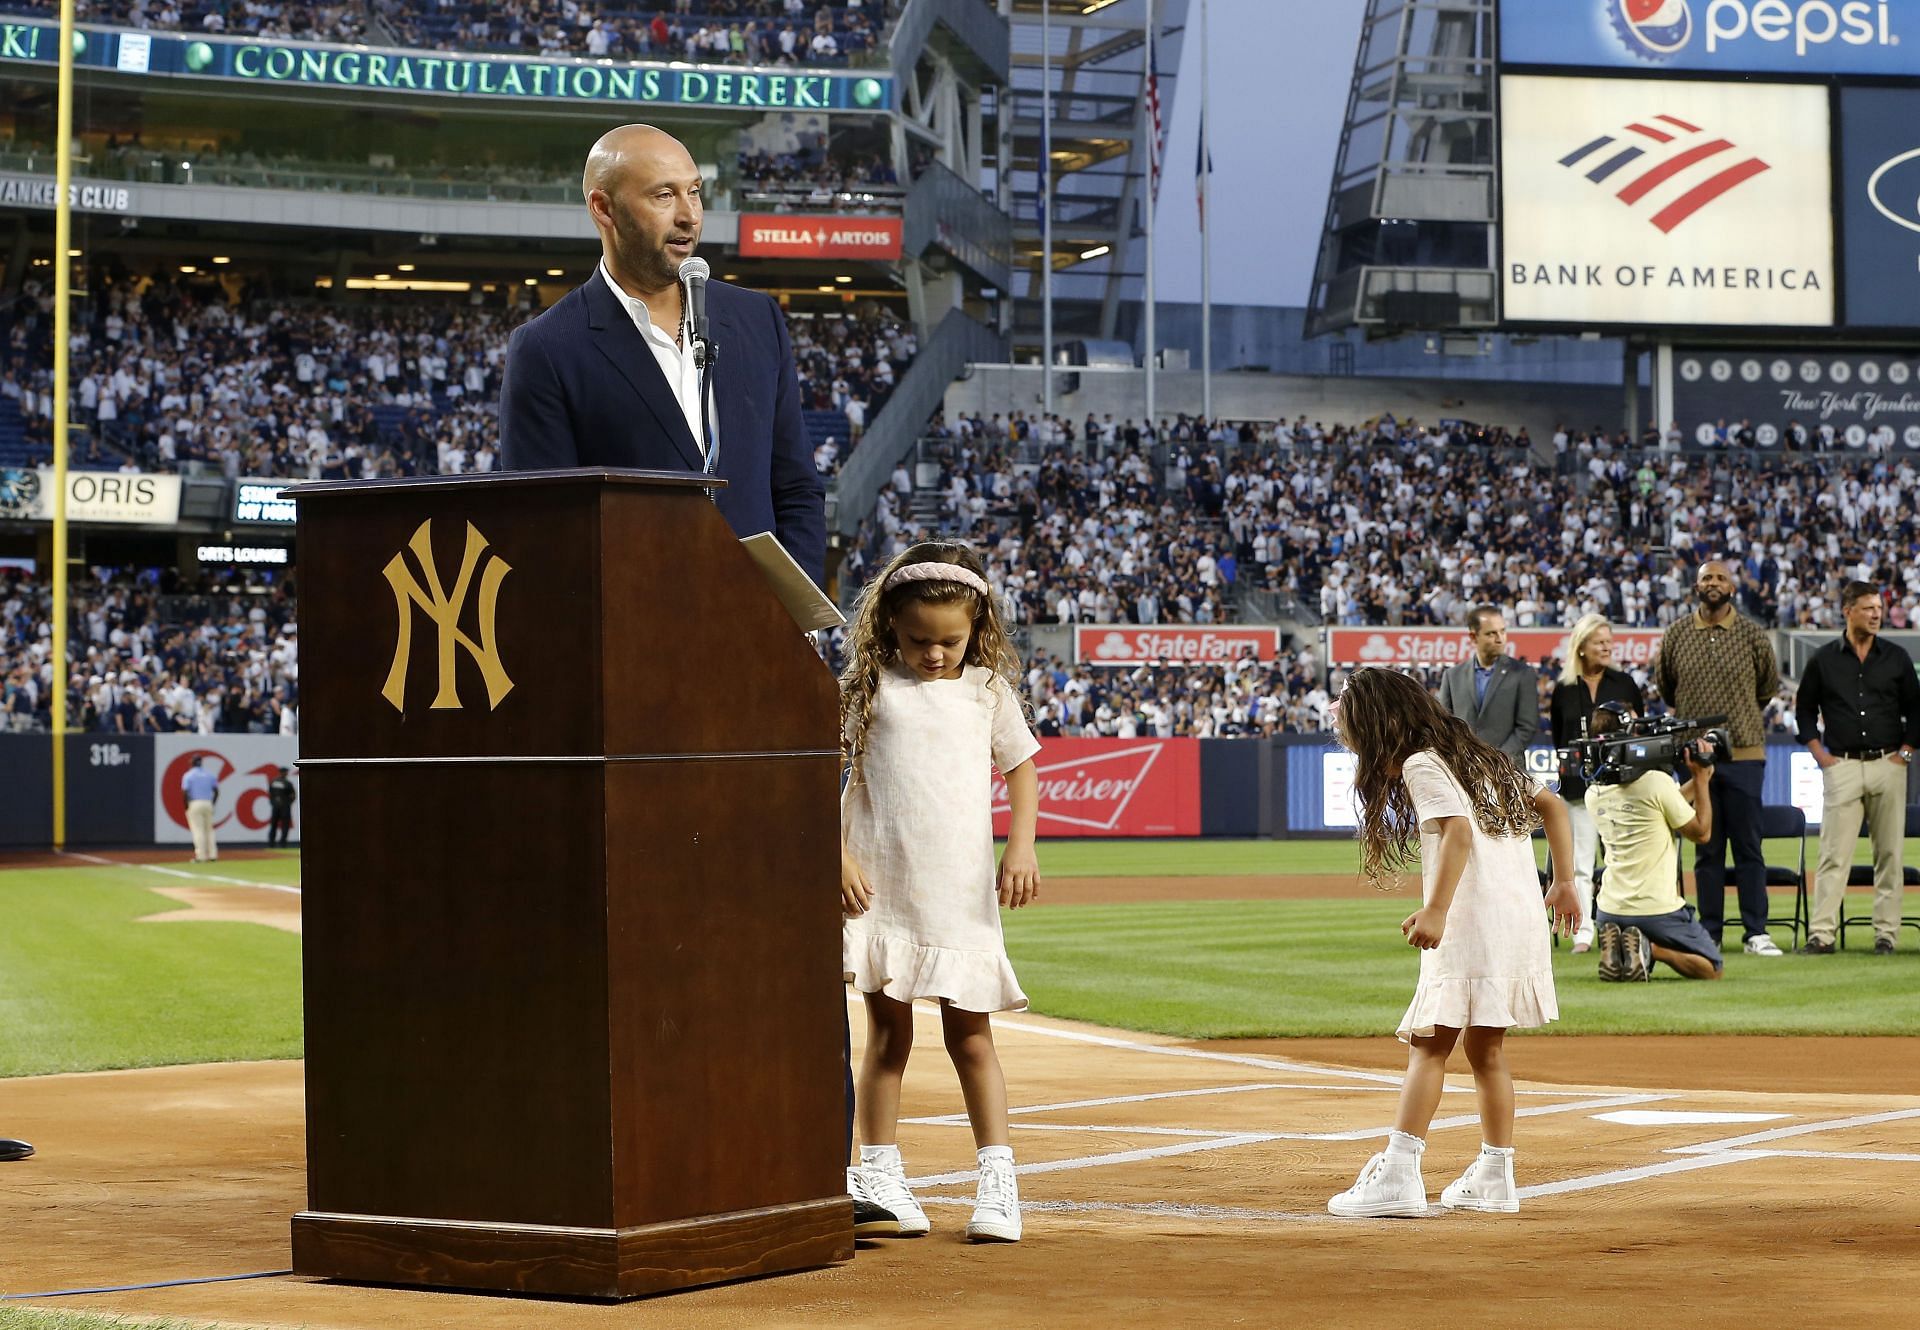 Hannah Jeter: Derek Jeter has learned to stay vigilant about his  surroundings after receiving unwelcome stares growing up